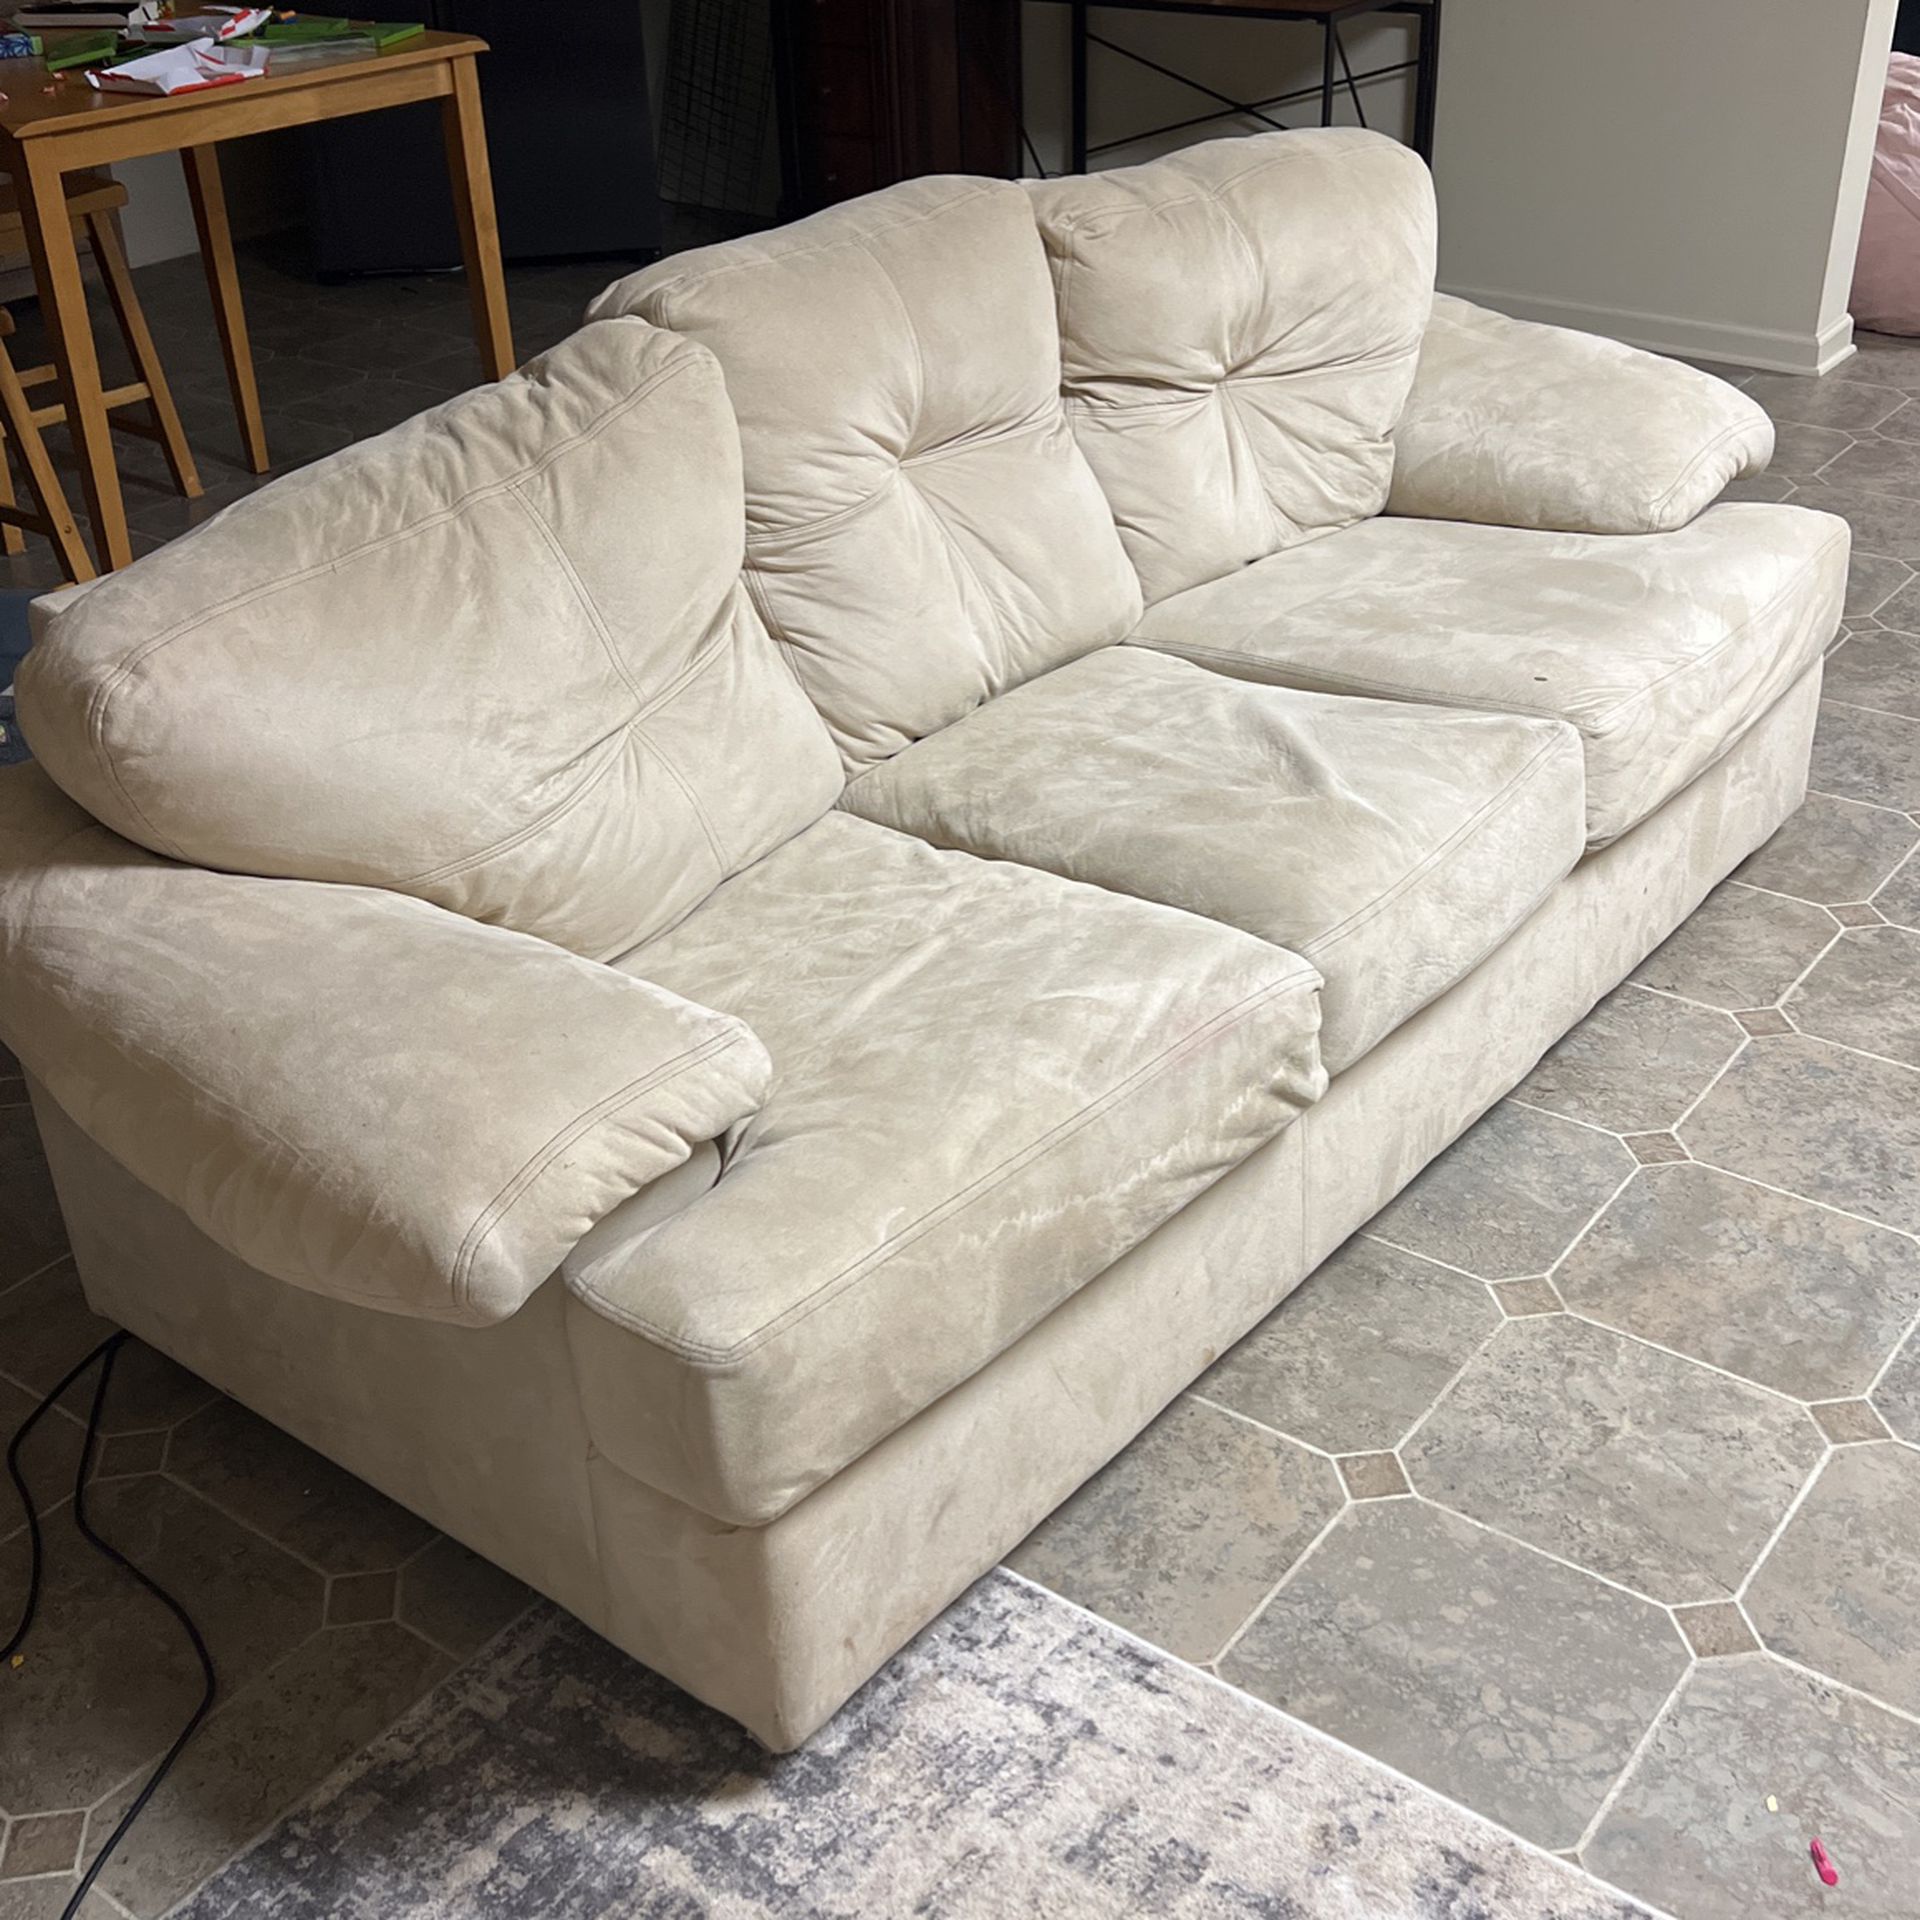 Beige Couch/Loveseat/Oversized Chair